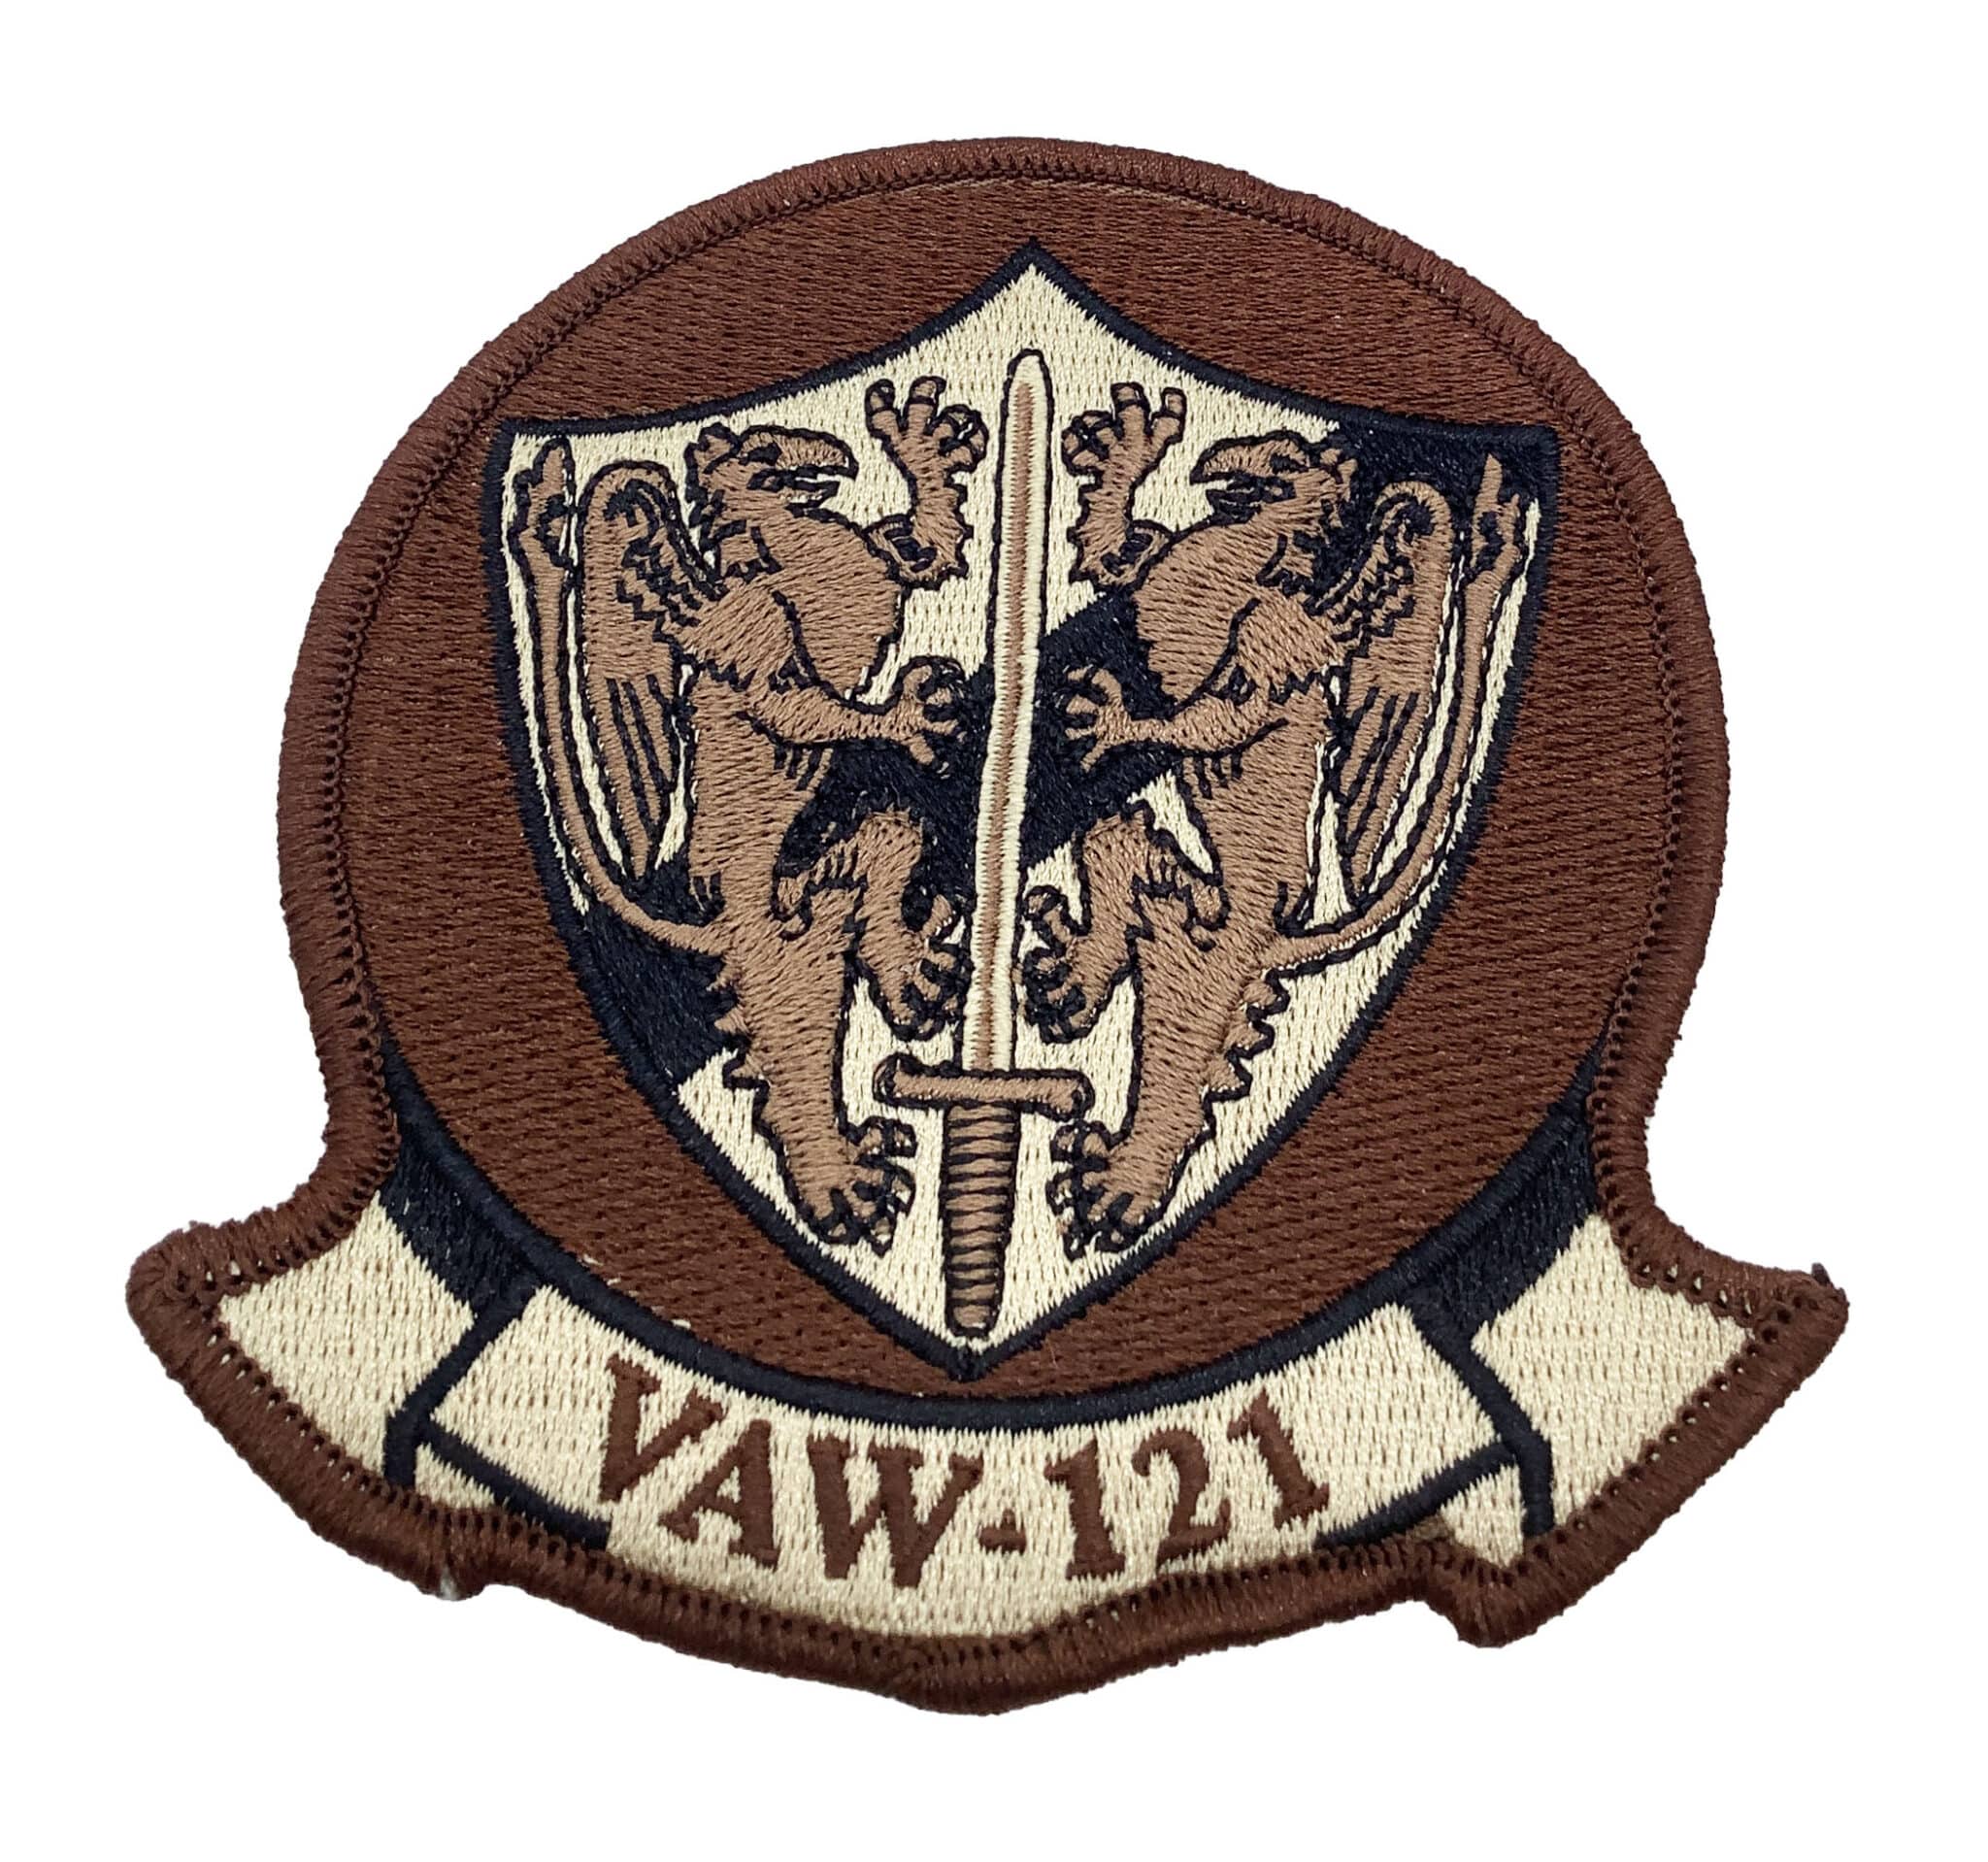 VAW-121 Blue Tails Desert Tan Patch – No Hook and Loop